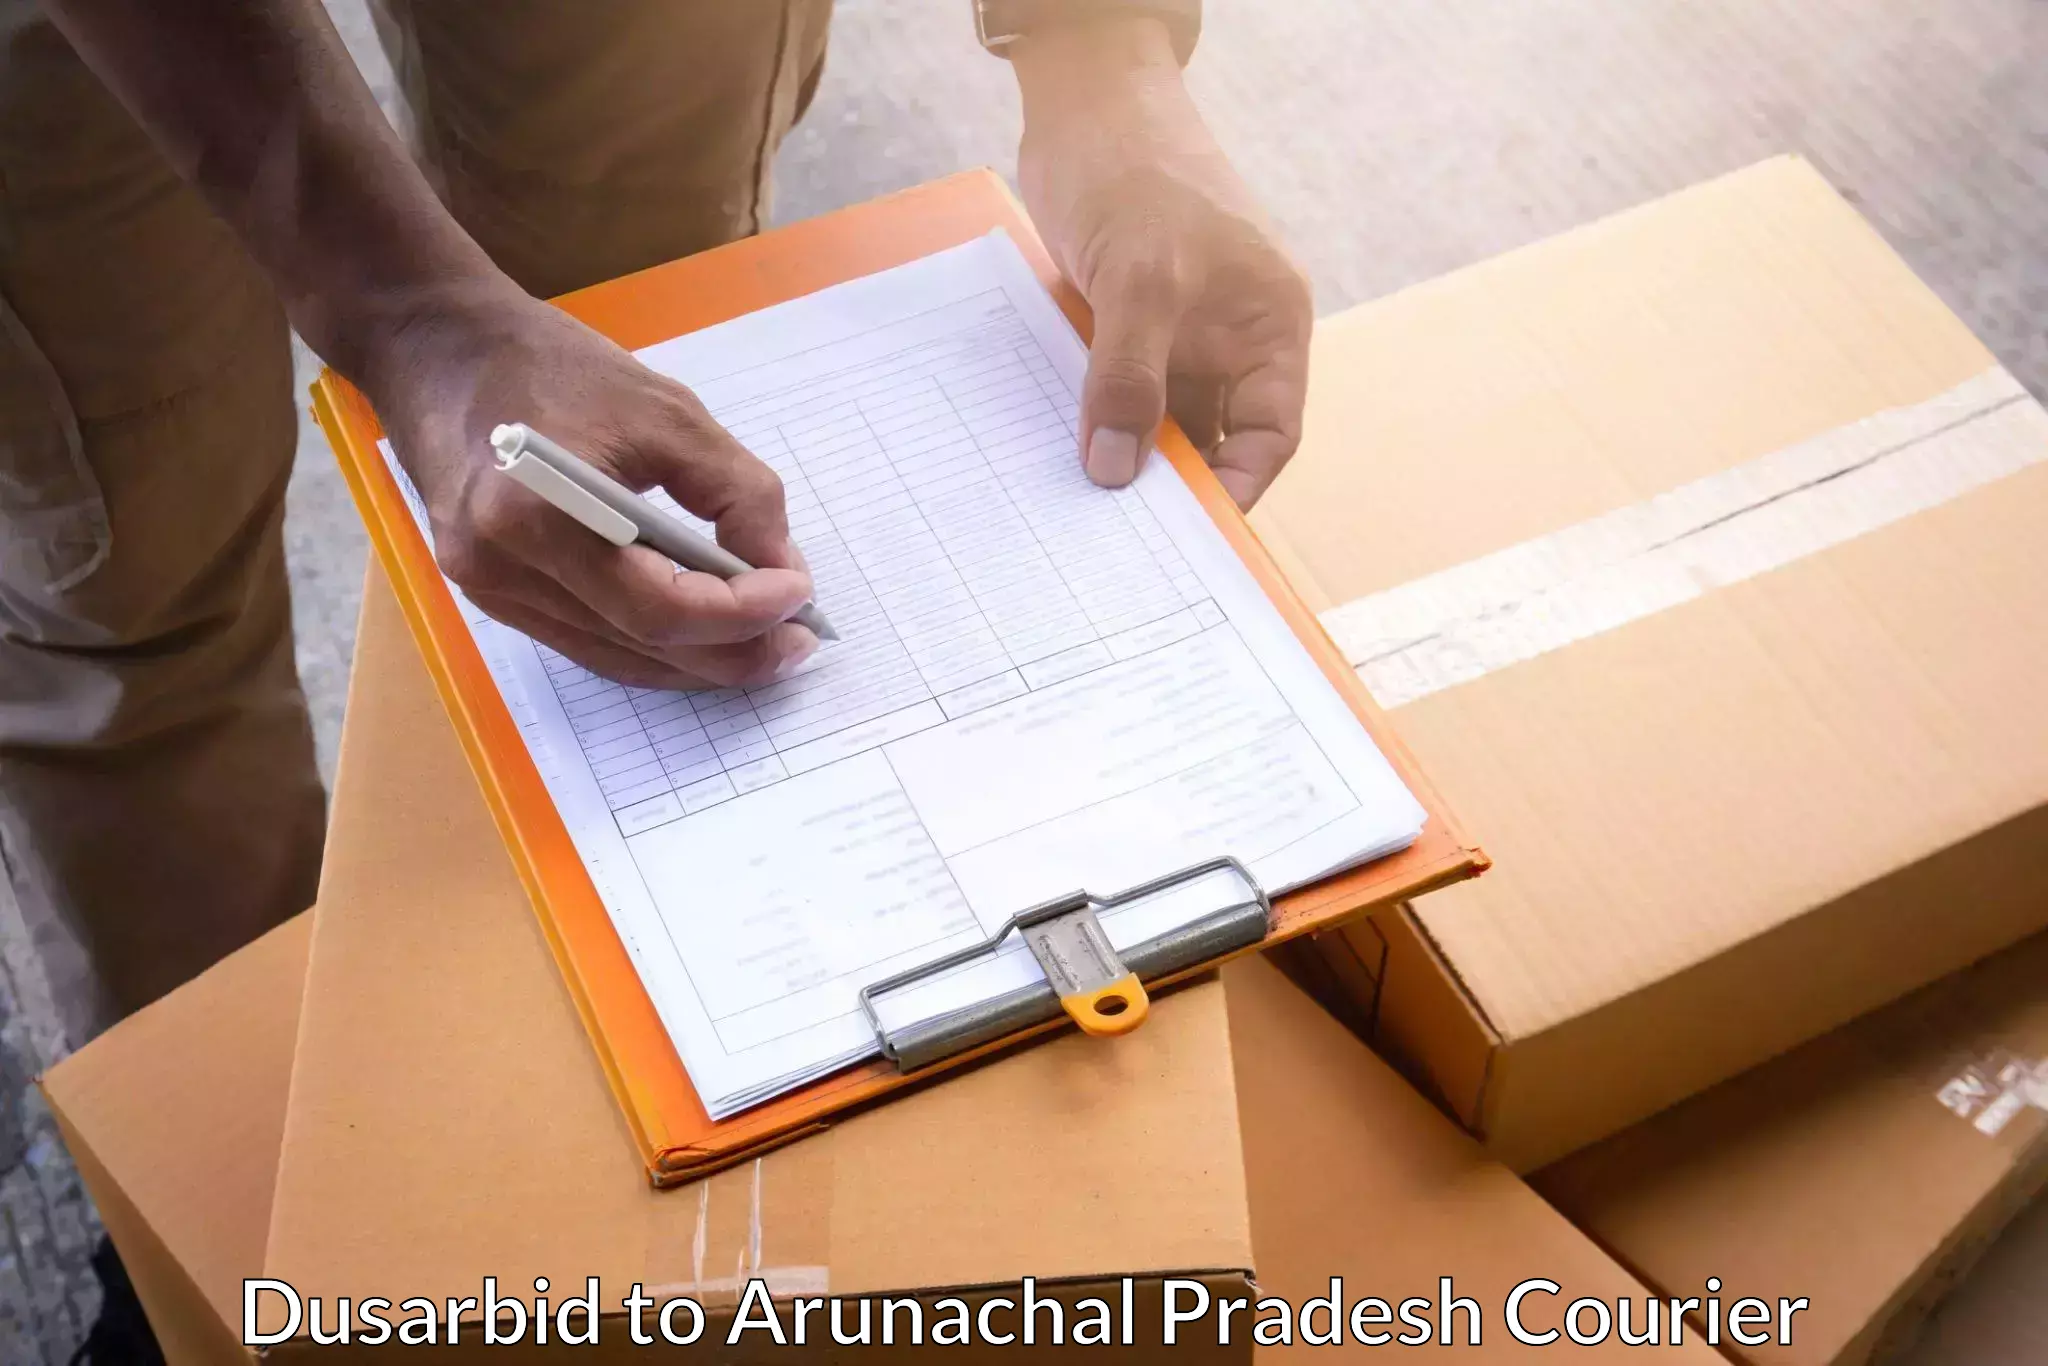 24-hour courier service Dusarbid to Basar